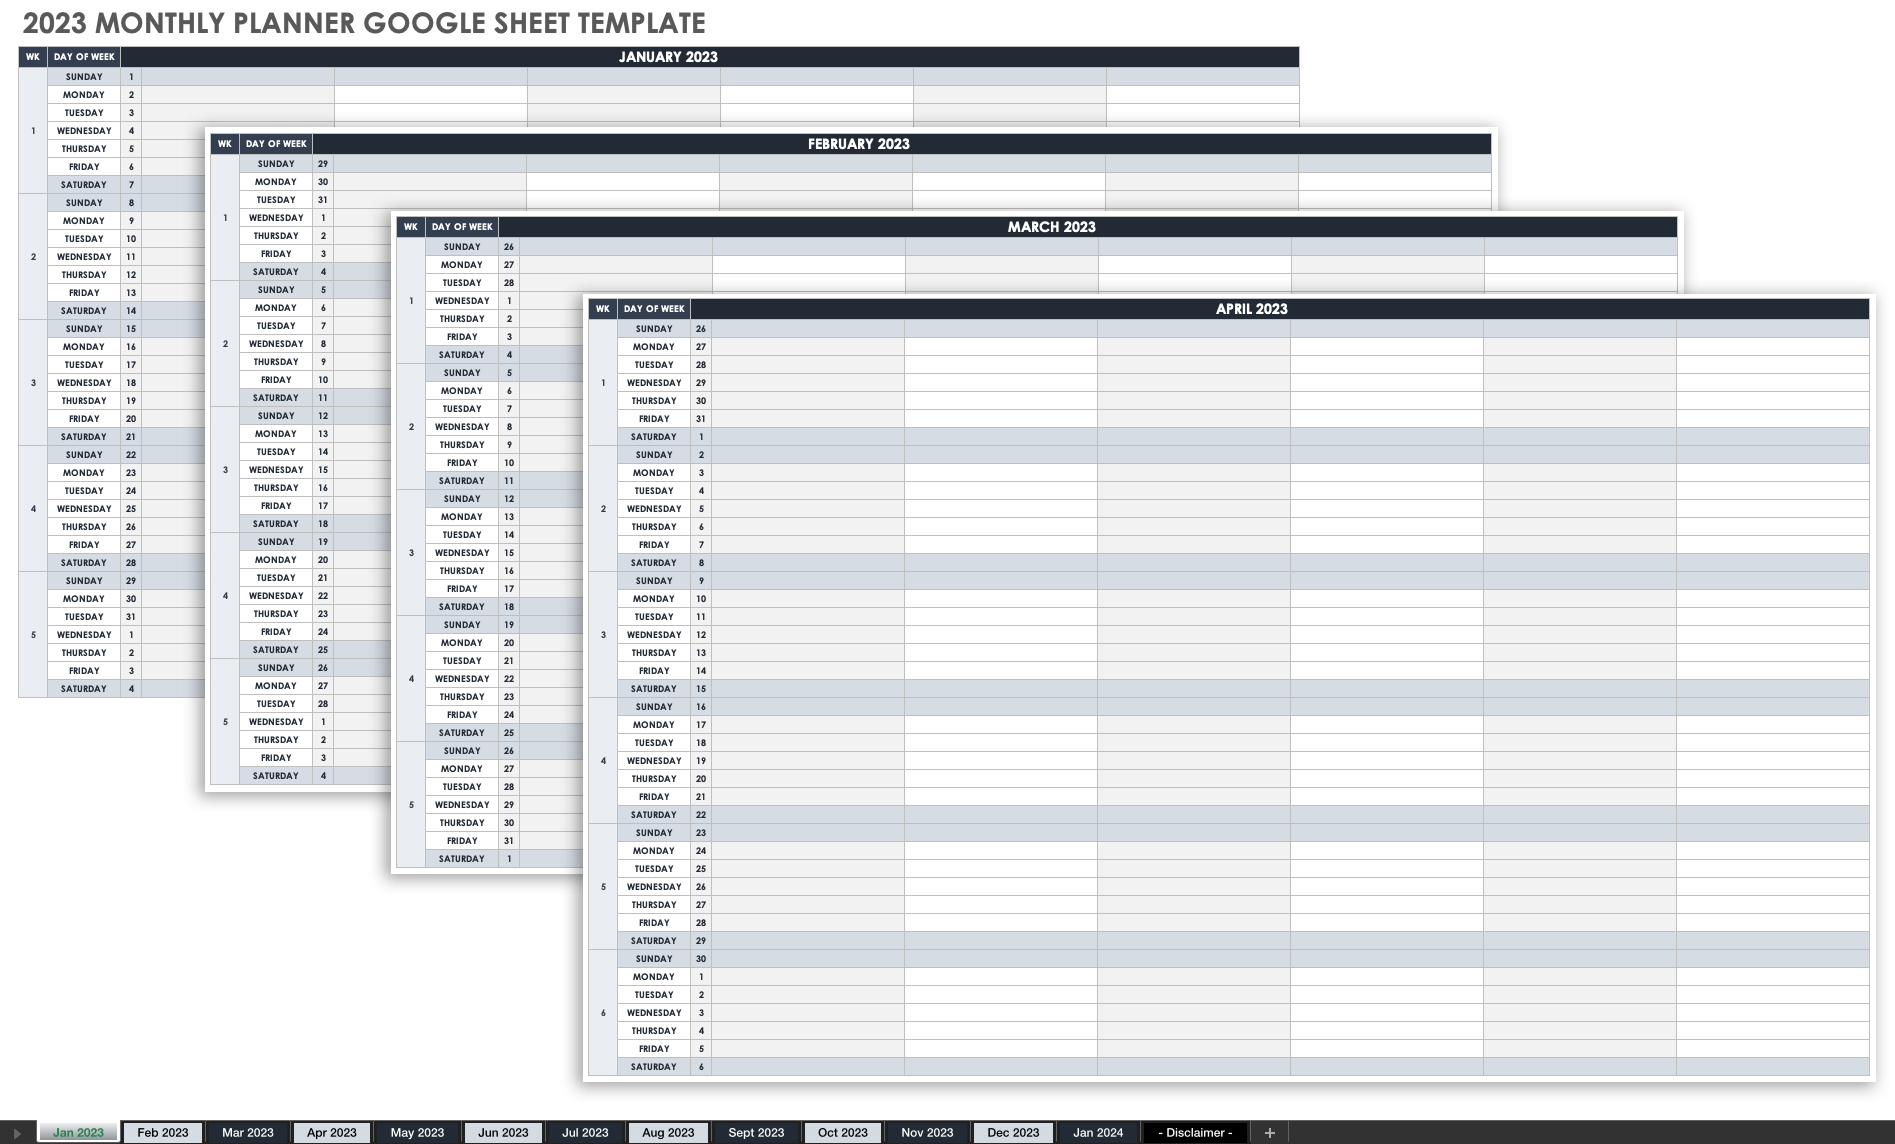 2023 Monthly Planner Template Google Sheet